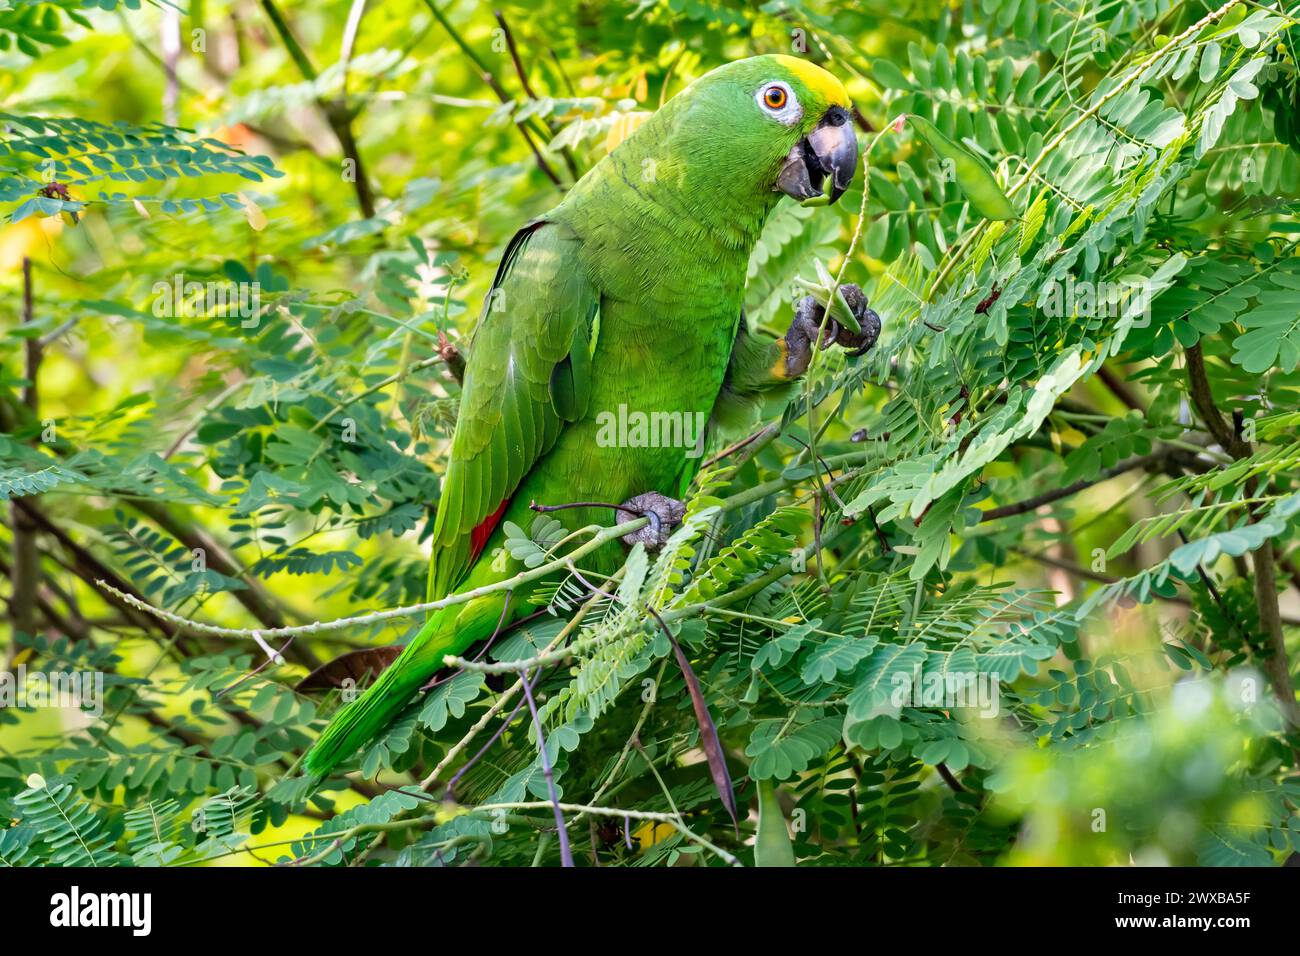 Close up of a Yellow-crowned Parrot, Amazona ochrocephala, chewing on seeds with a pod in his talons in a Pride of Barbados tree Stock Photo